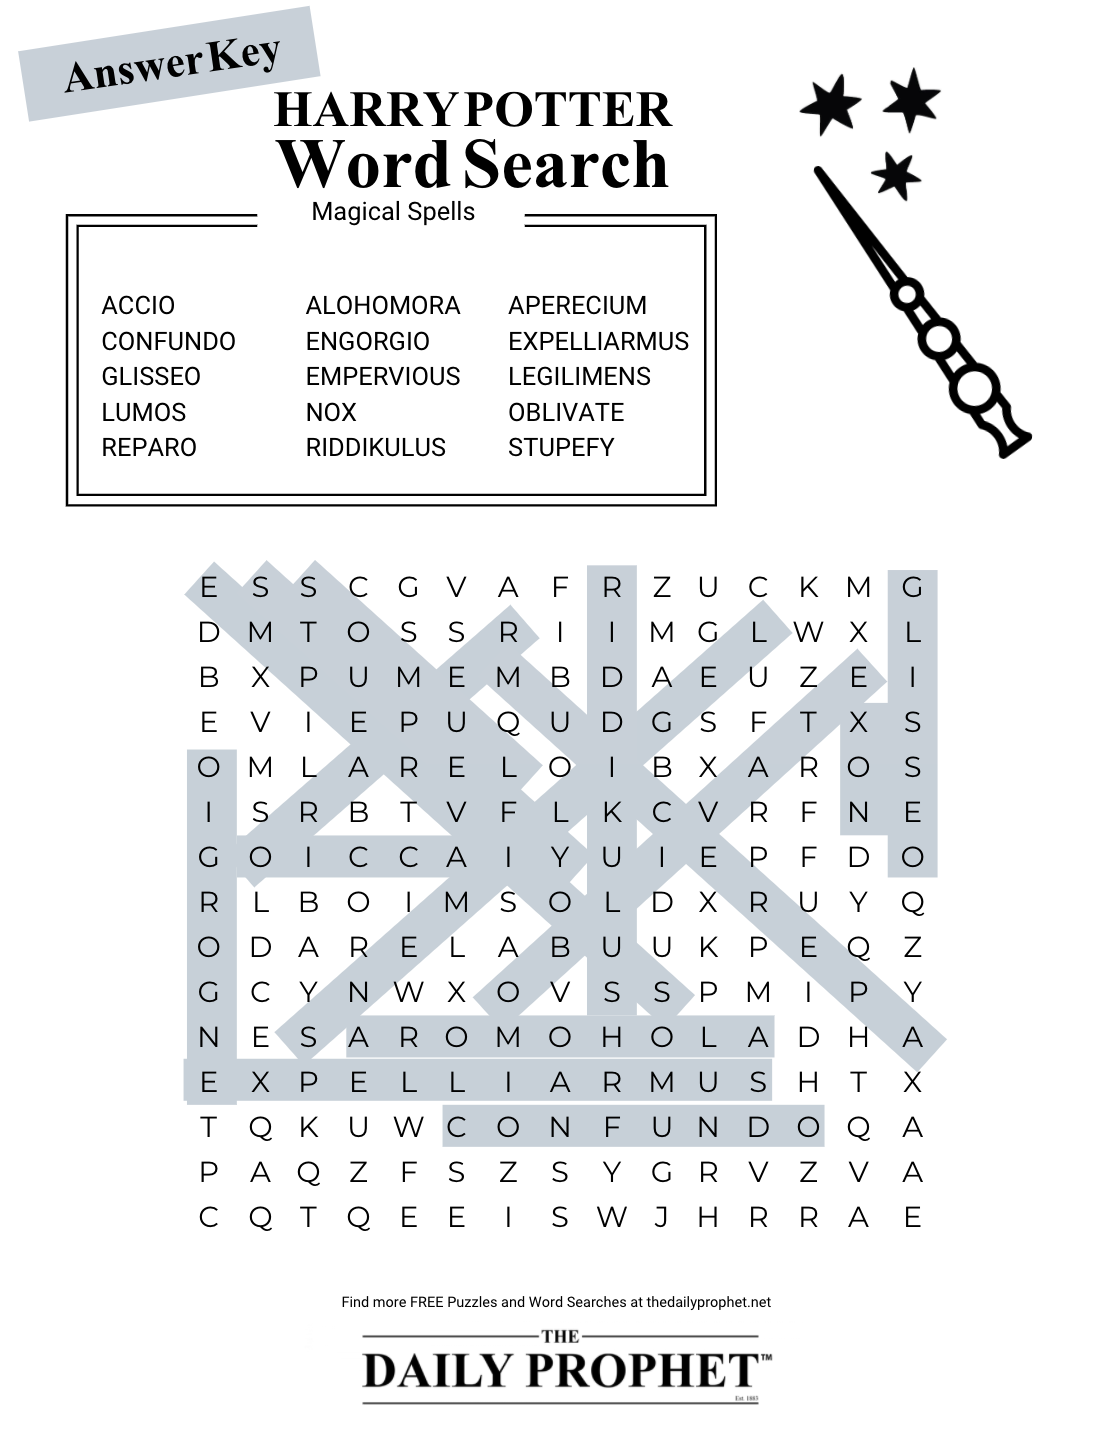 Harry Potter Word Search Answer Key